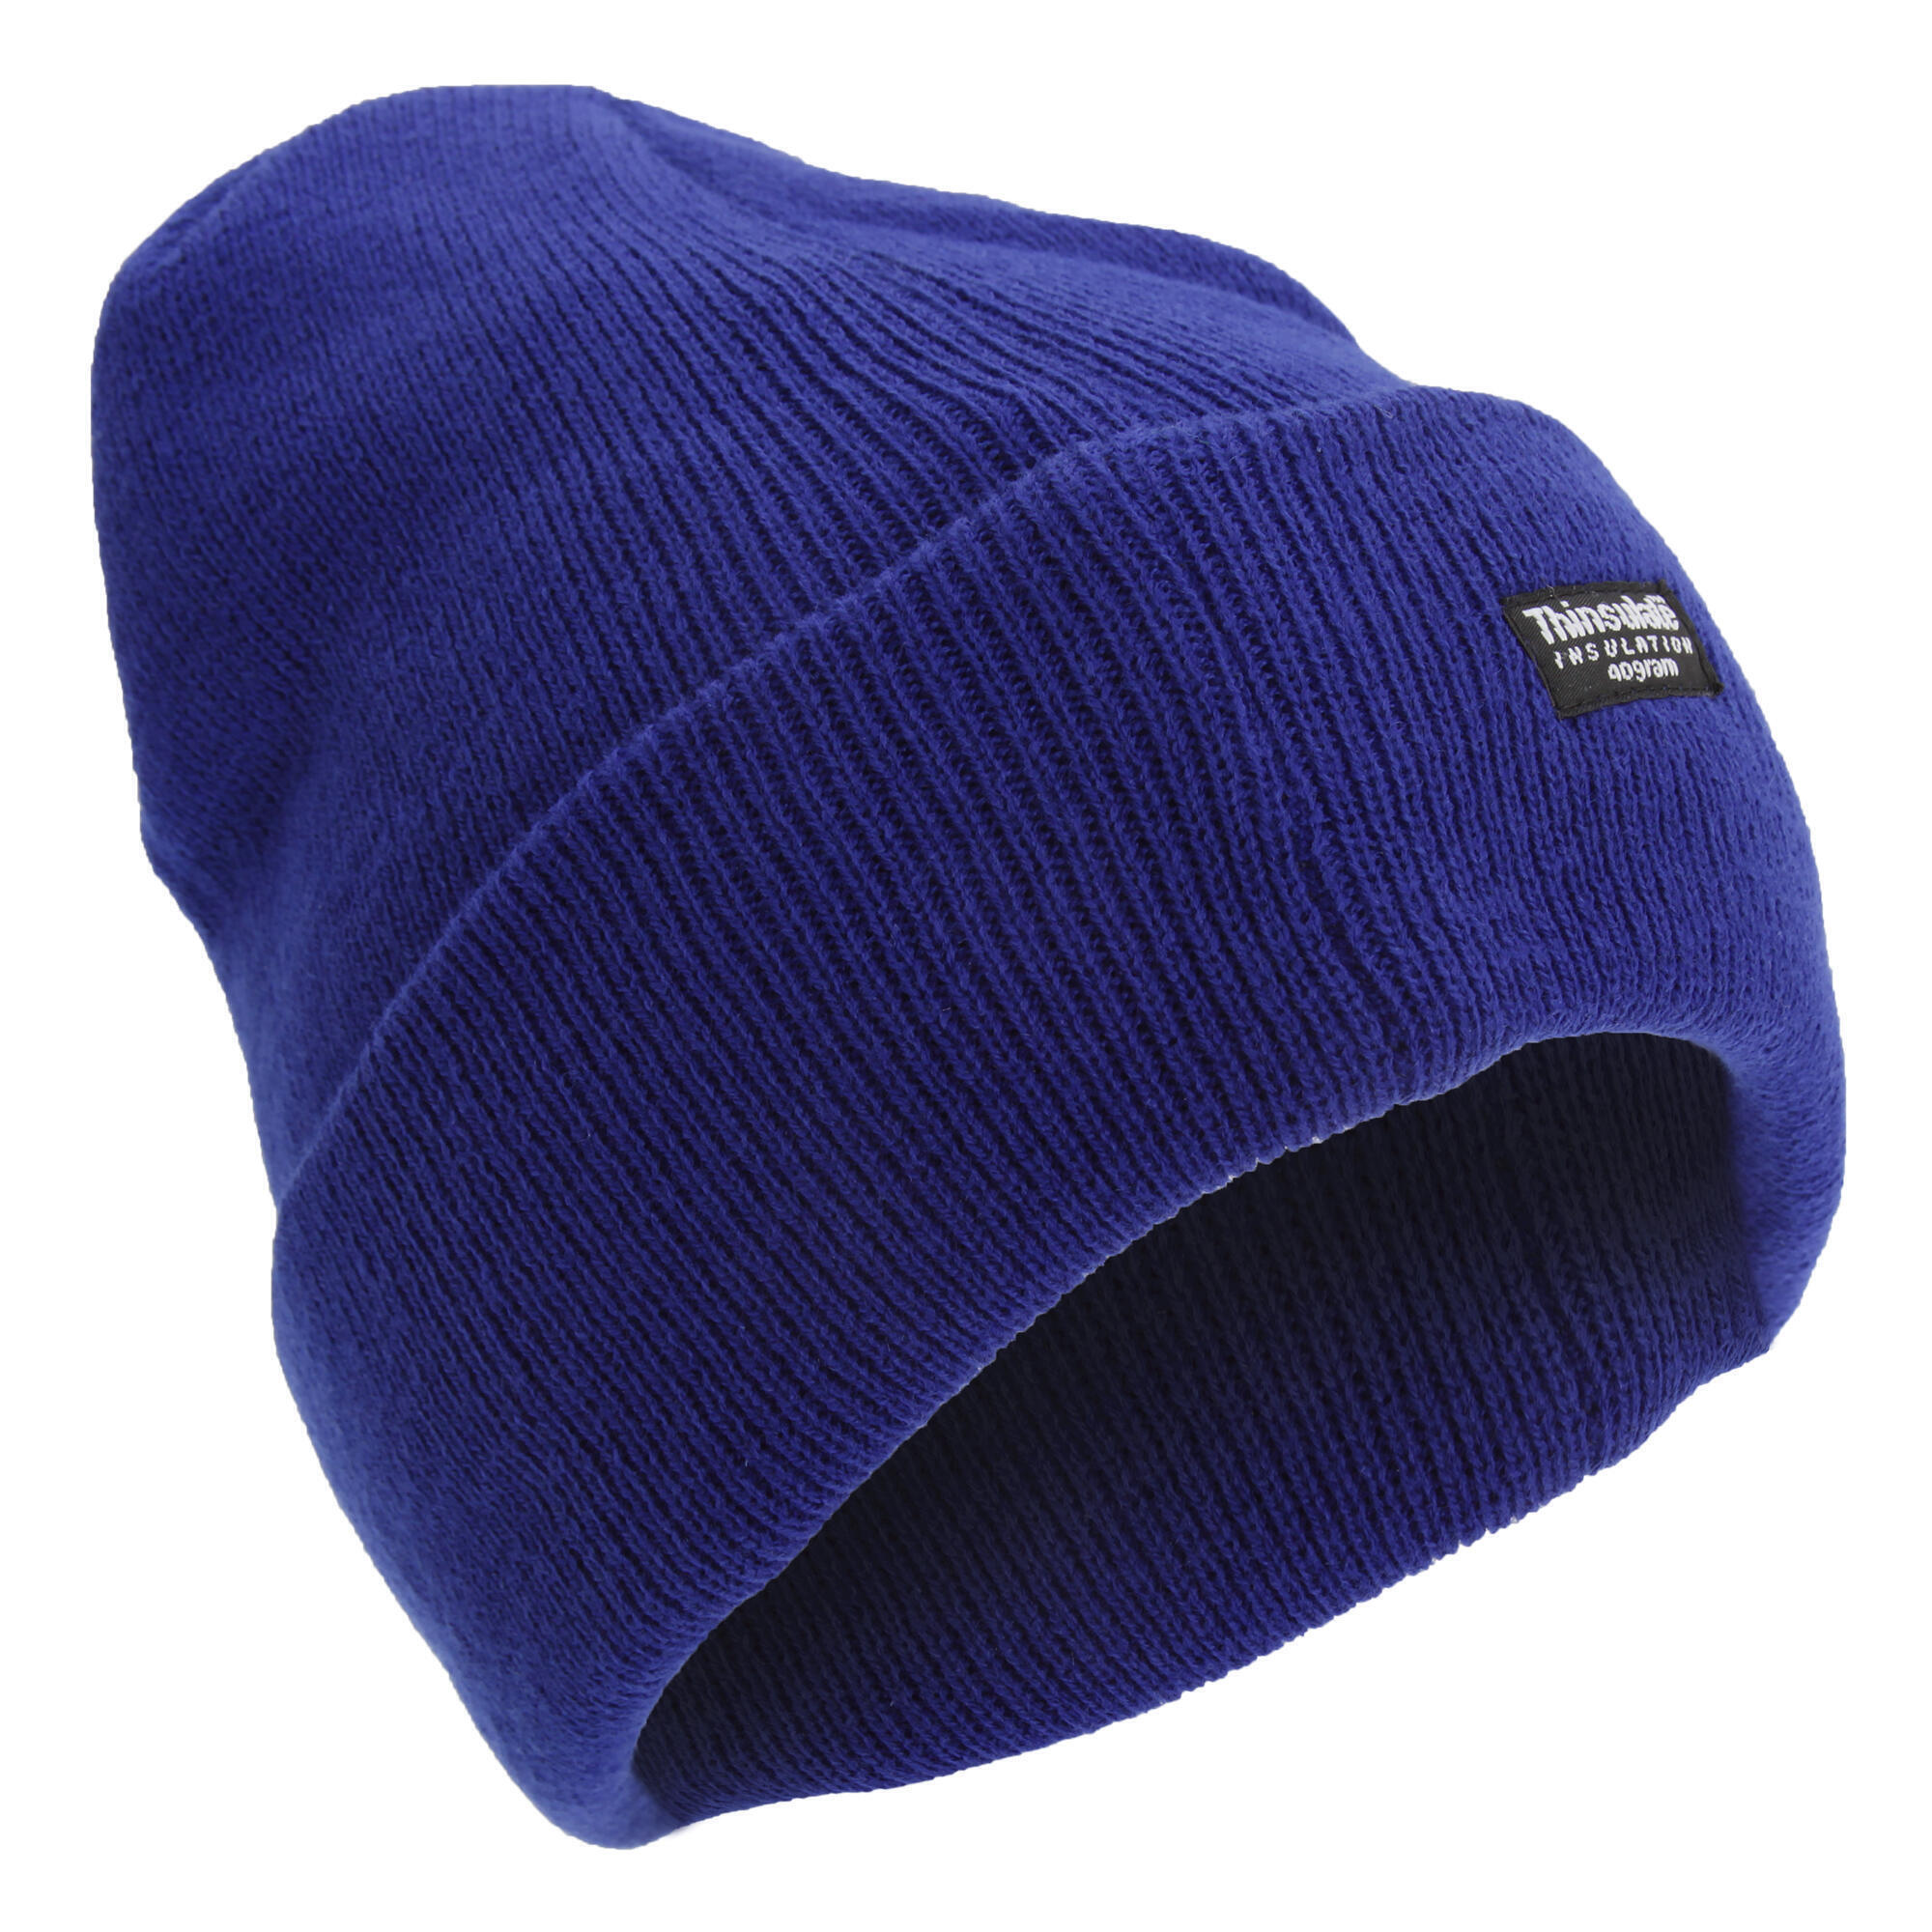 Unisex Thinsulate Lined Winter Hat (Black) 3/4